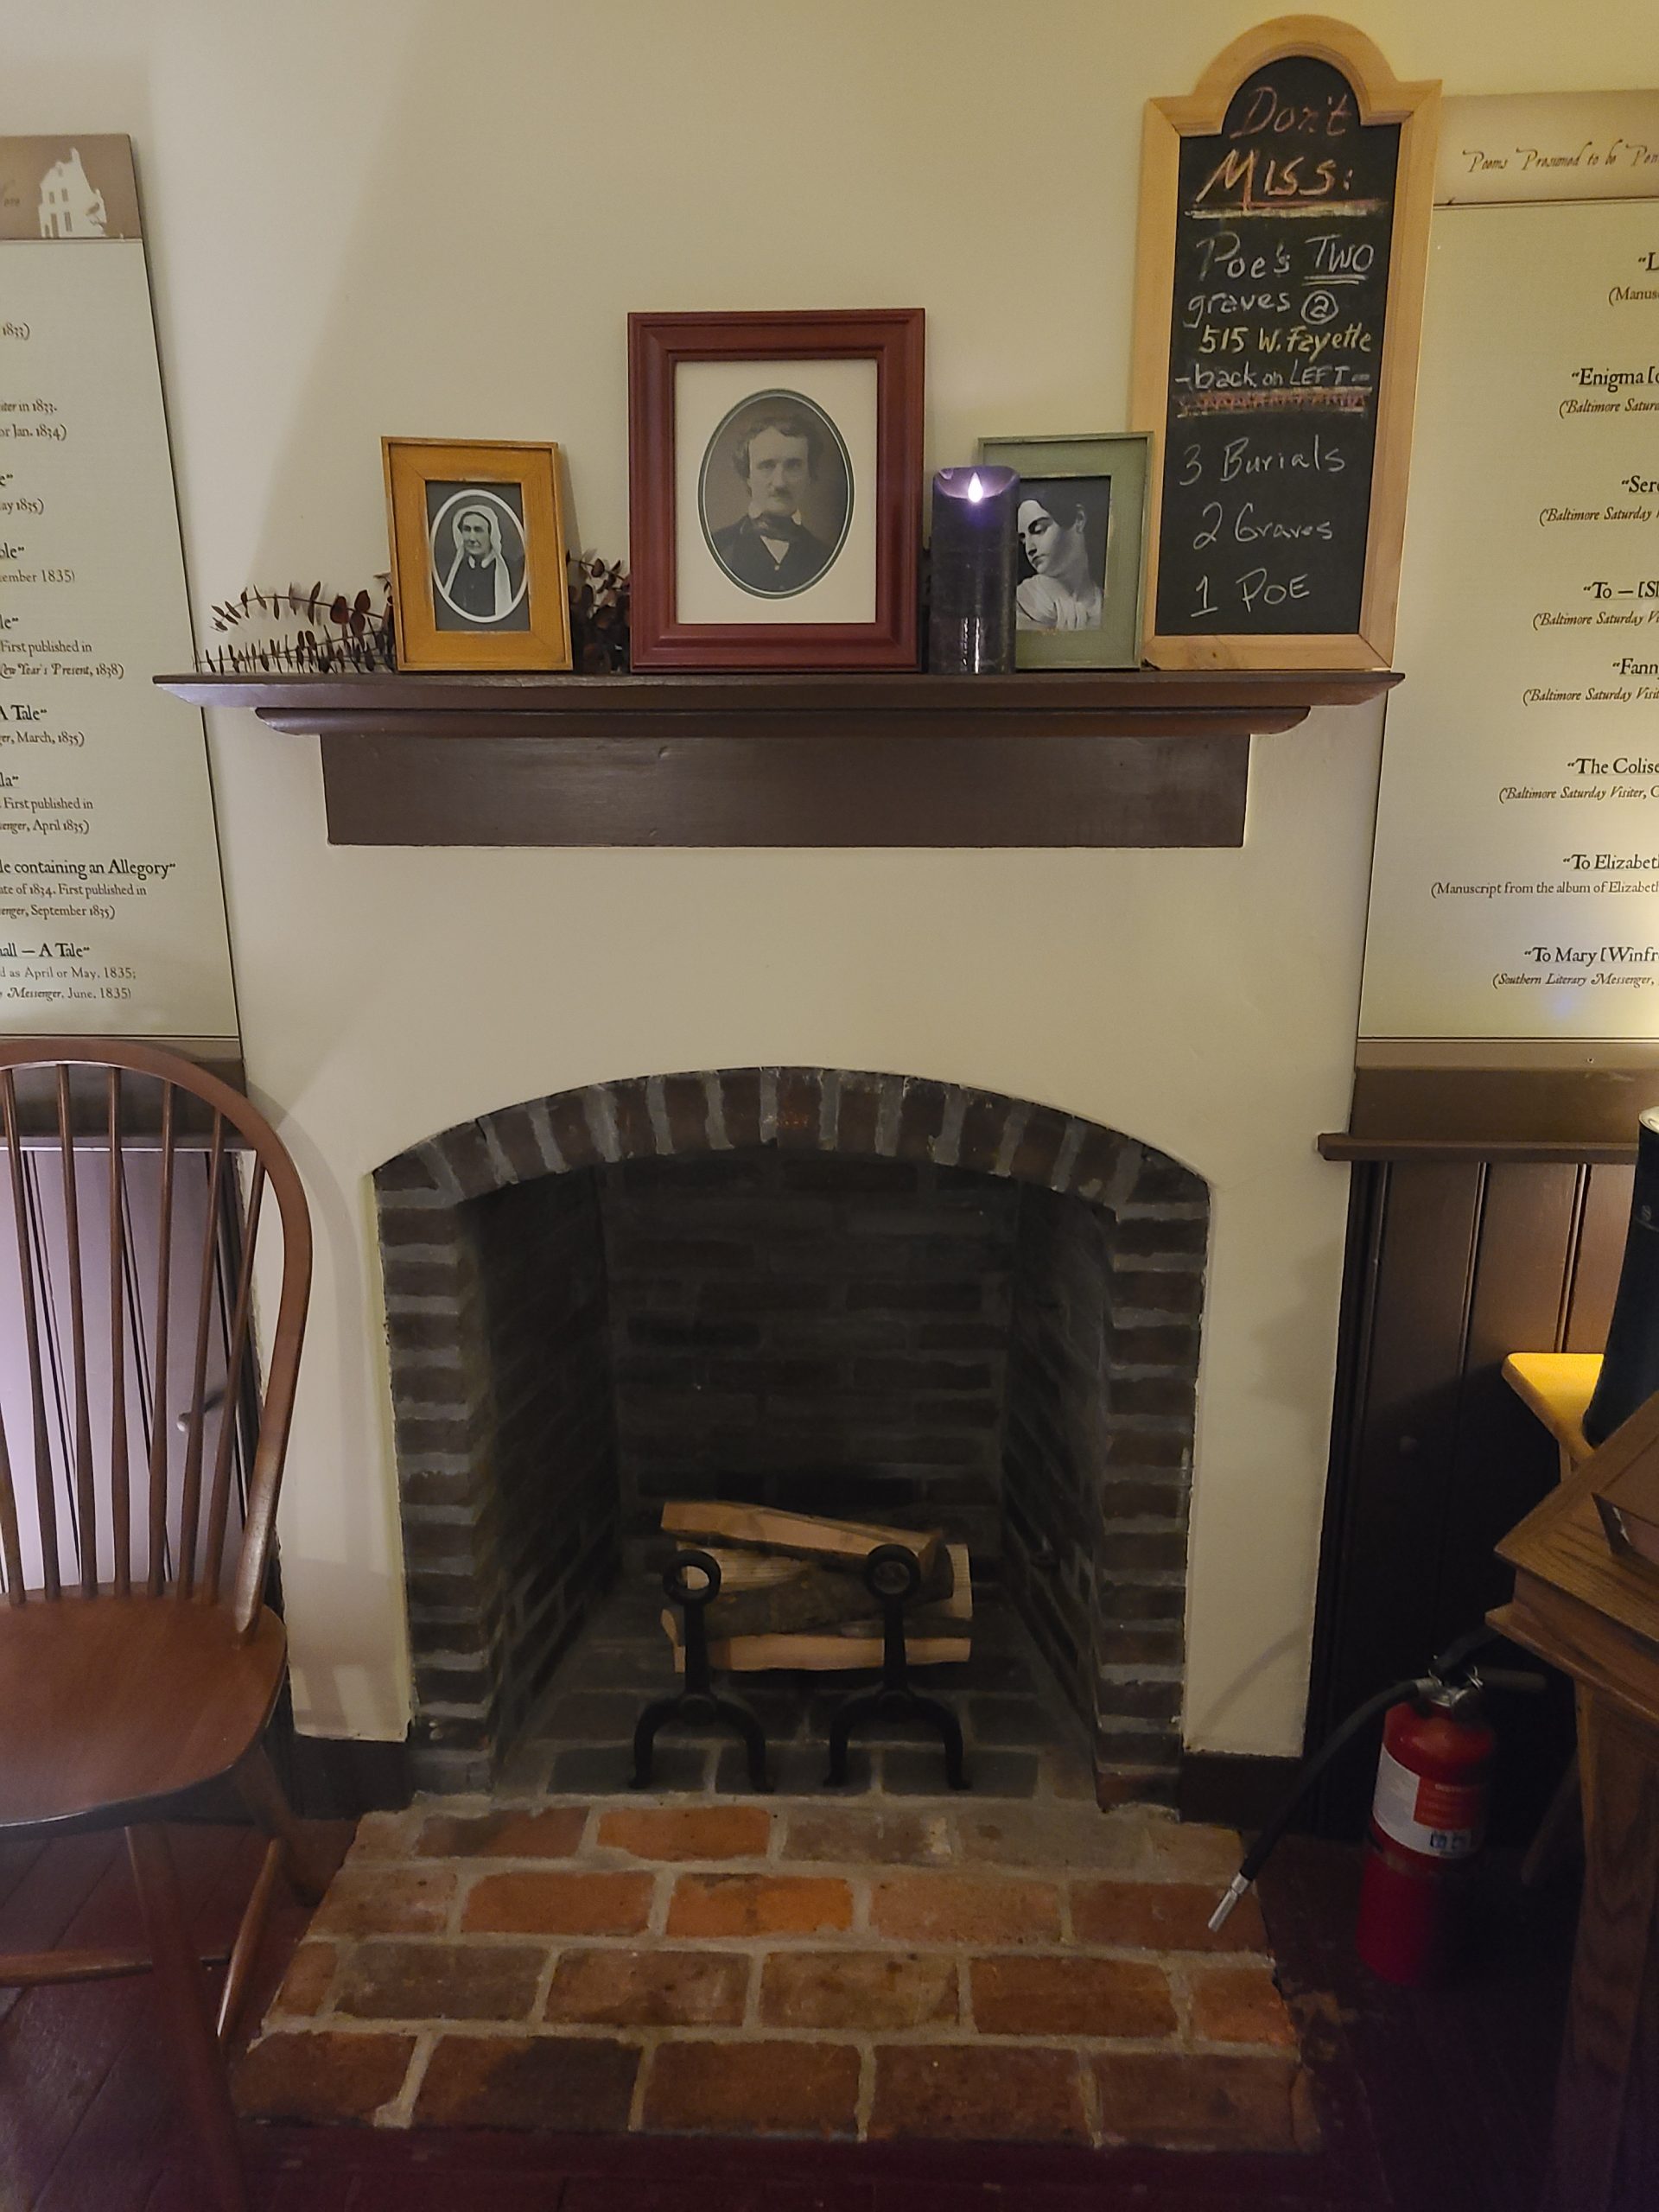 The fireplace in Edgar Allan Poe's home